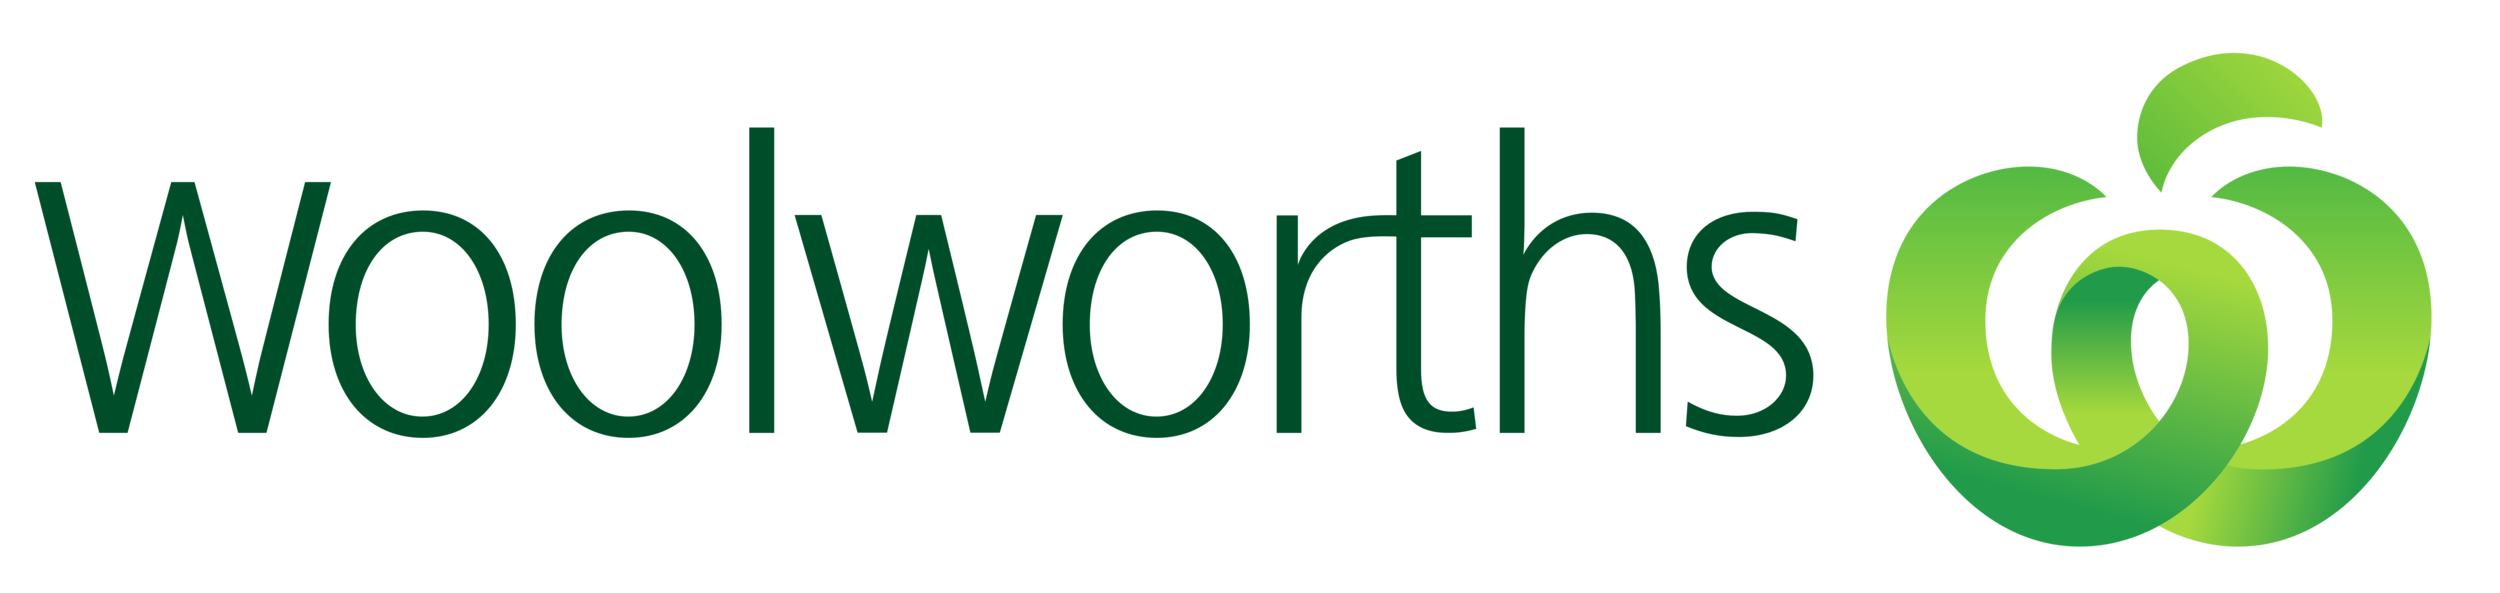 Woolworths_logo (002).png